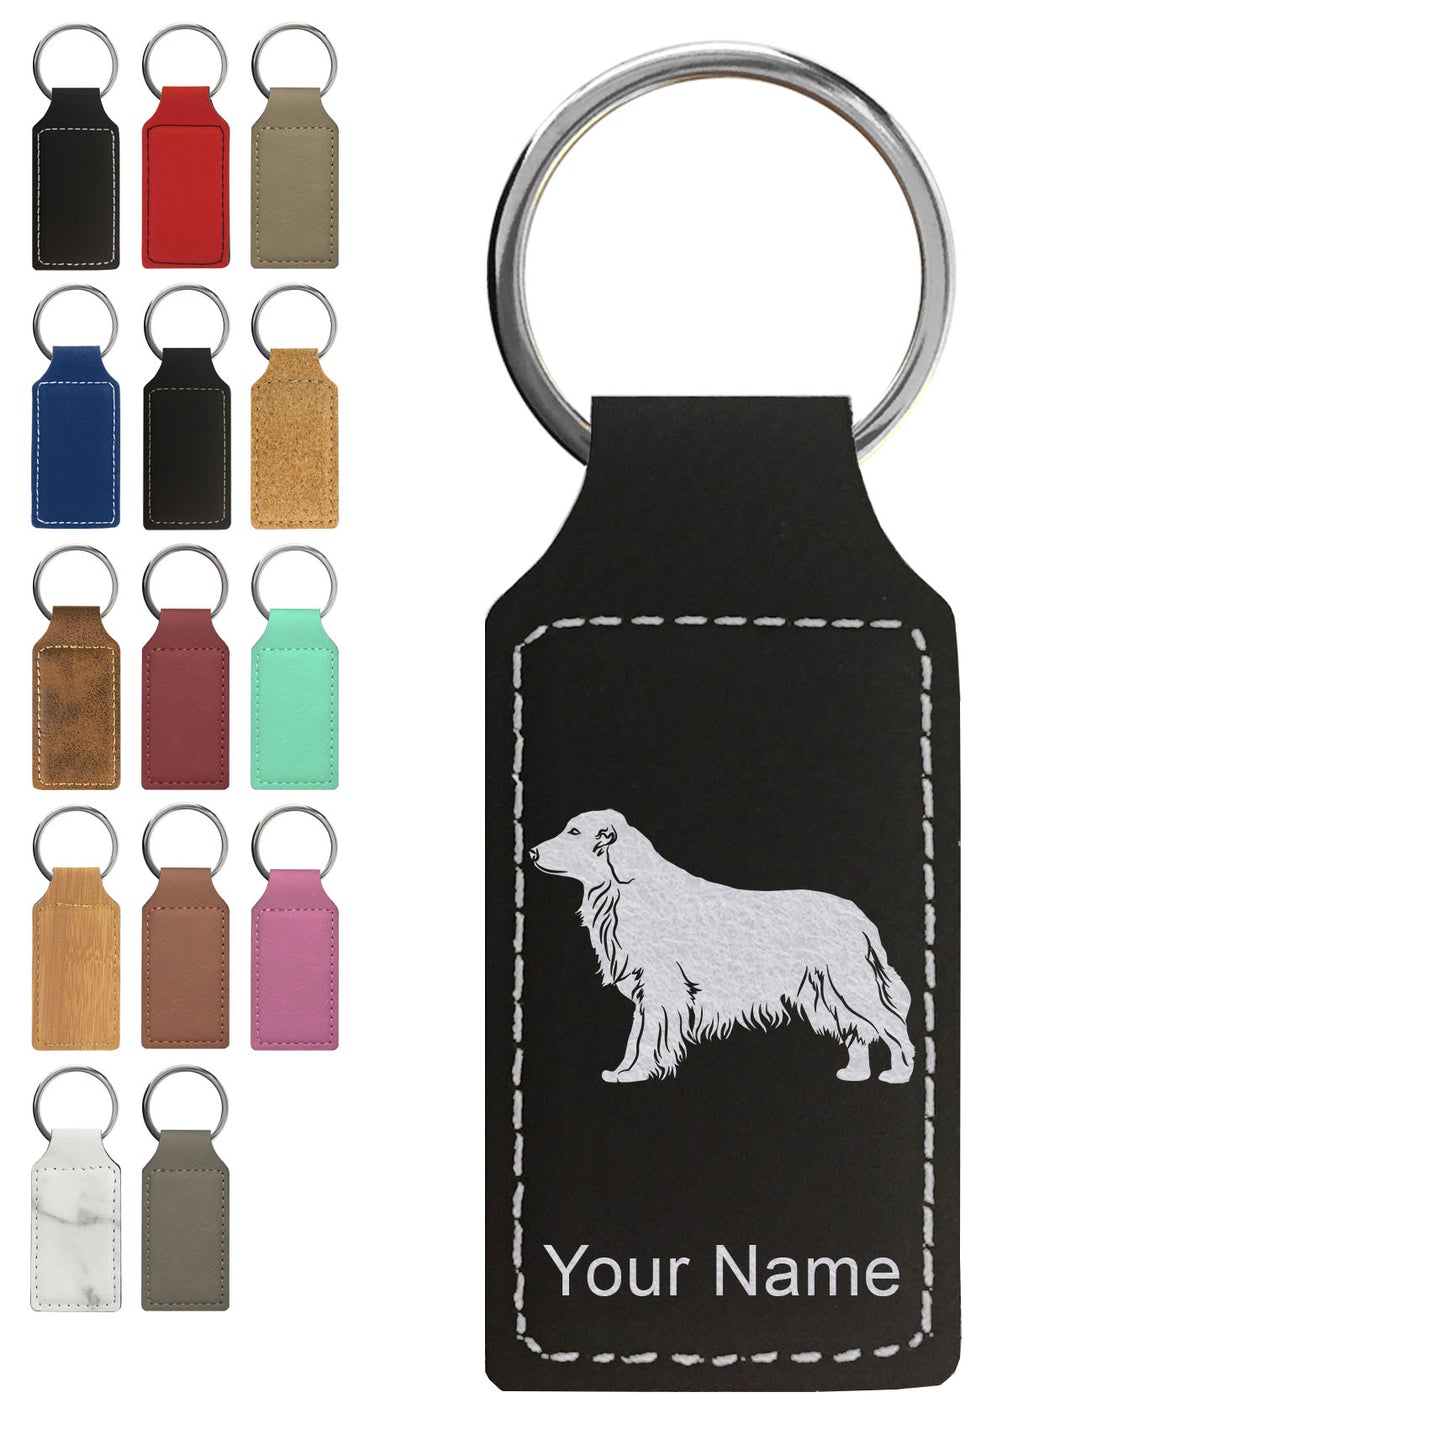 Faux Leather Rectangle Keychain, Golden Retriever Dog, Personalized Engraving Included